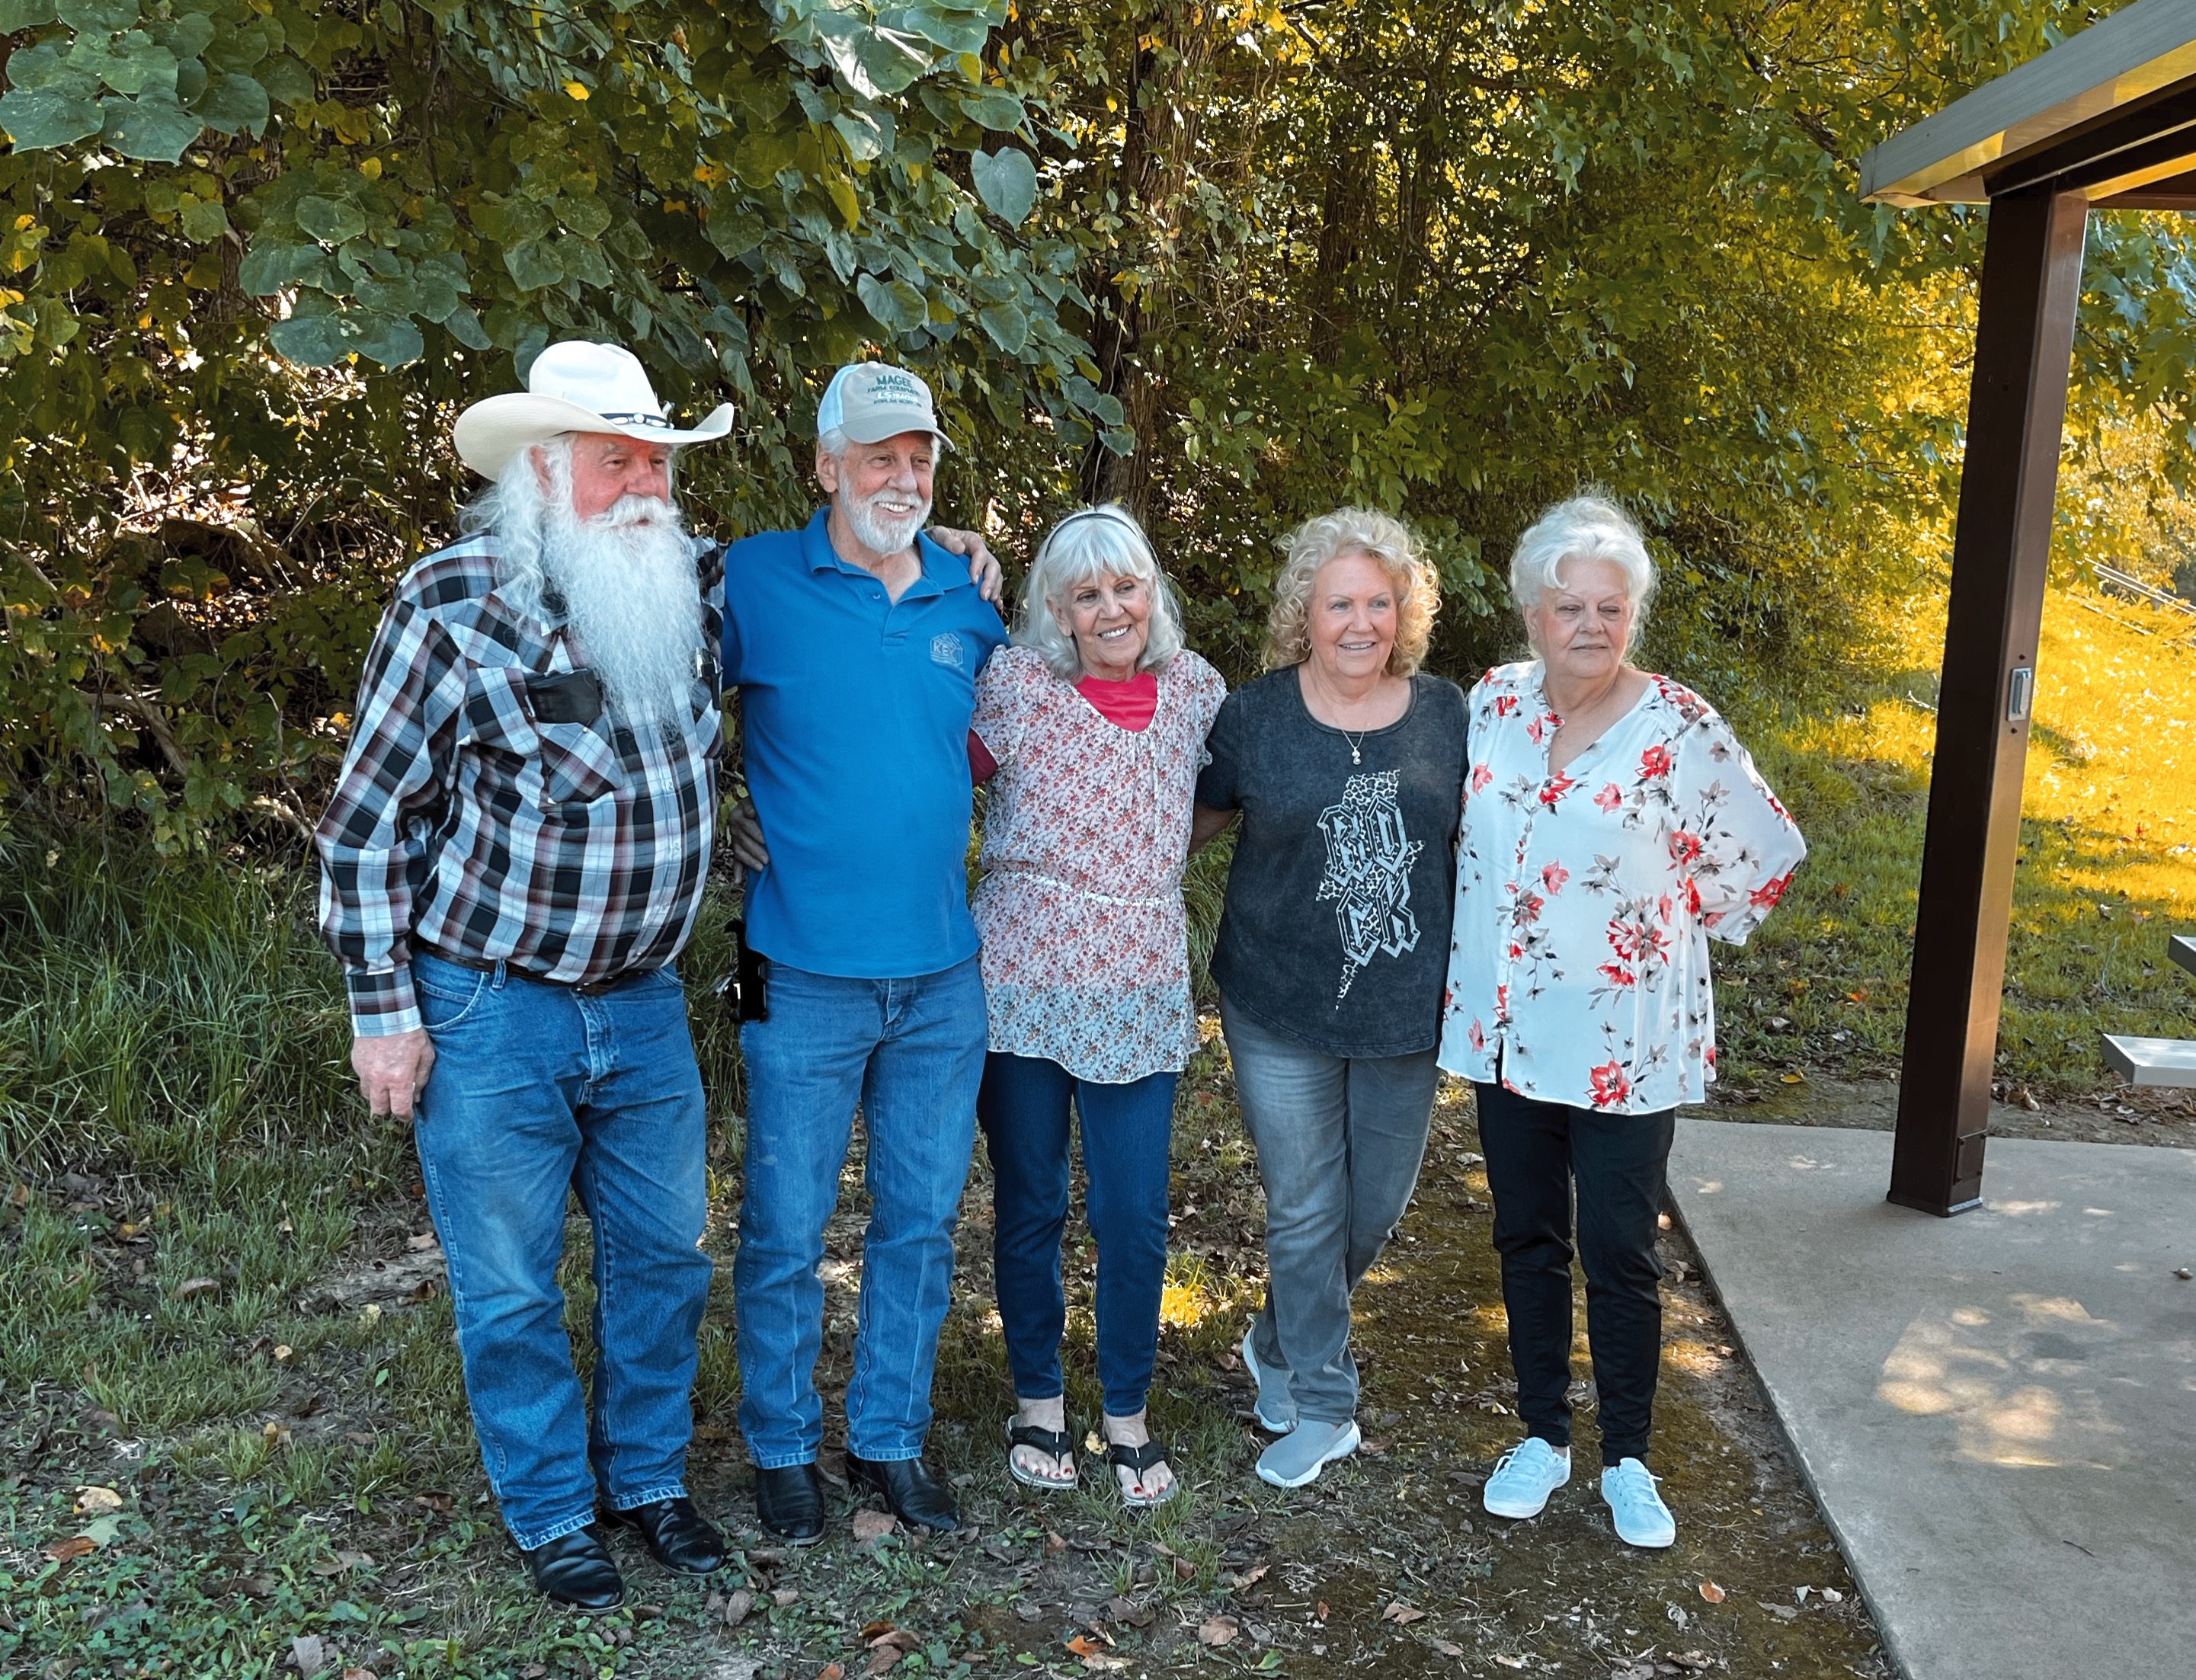 “Family Reunion 2021” Uncle Marvin, Jerry, Mom, Aunt Barbara, and Phyllis